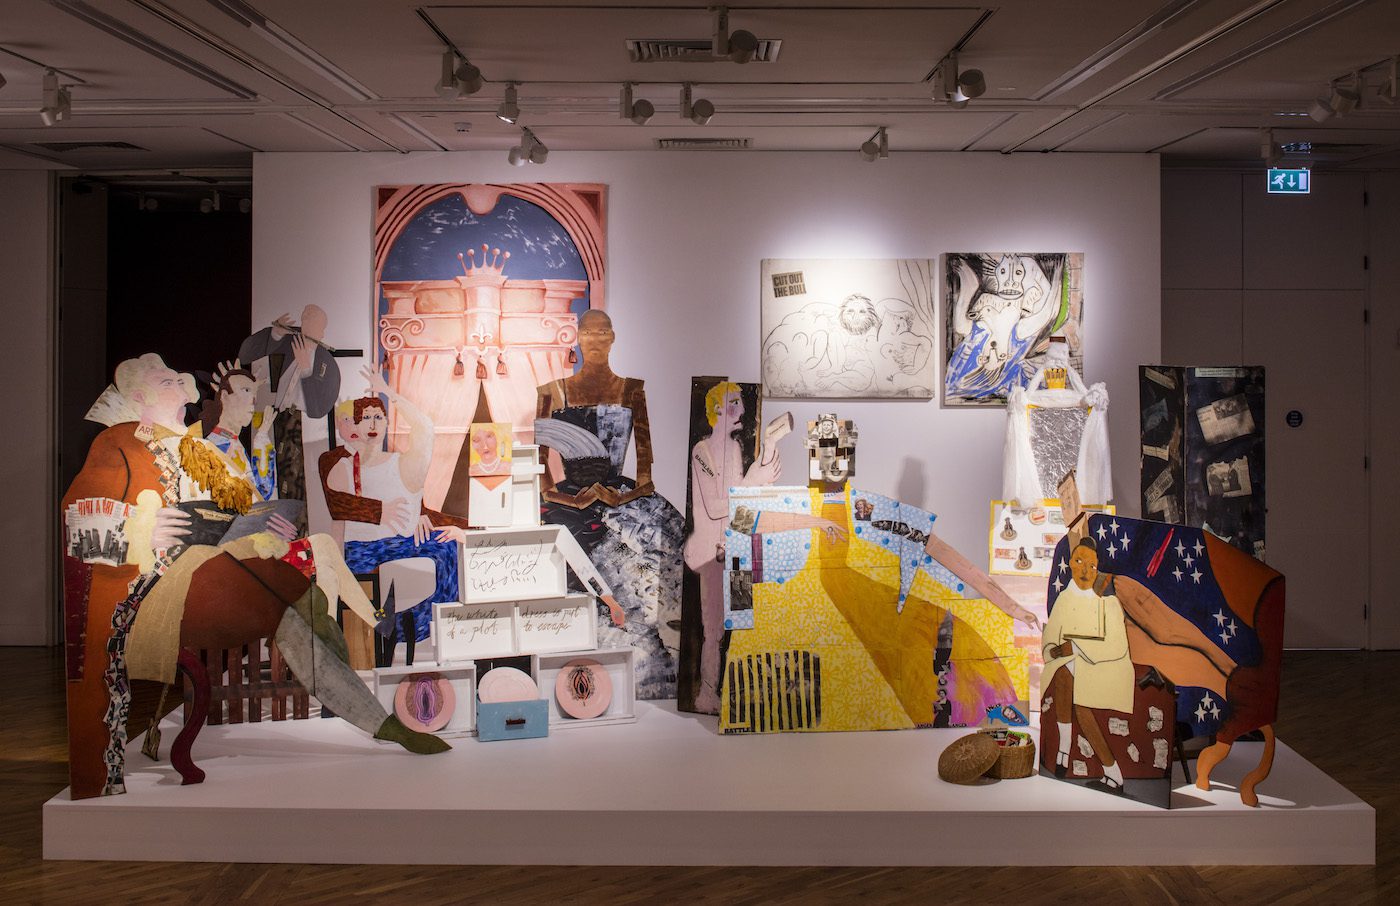 Lubaina Himid, A Fashionable Marriage, 1987. The Turner Prize Exhibition. Ferens Art Gallery. Hull. Photograph by David Levene.